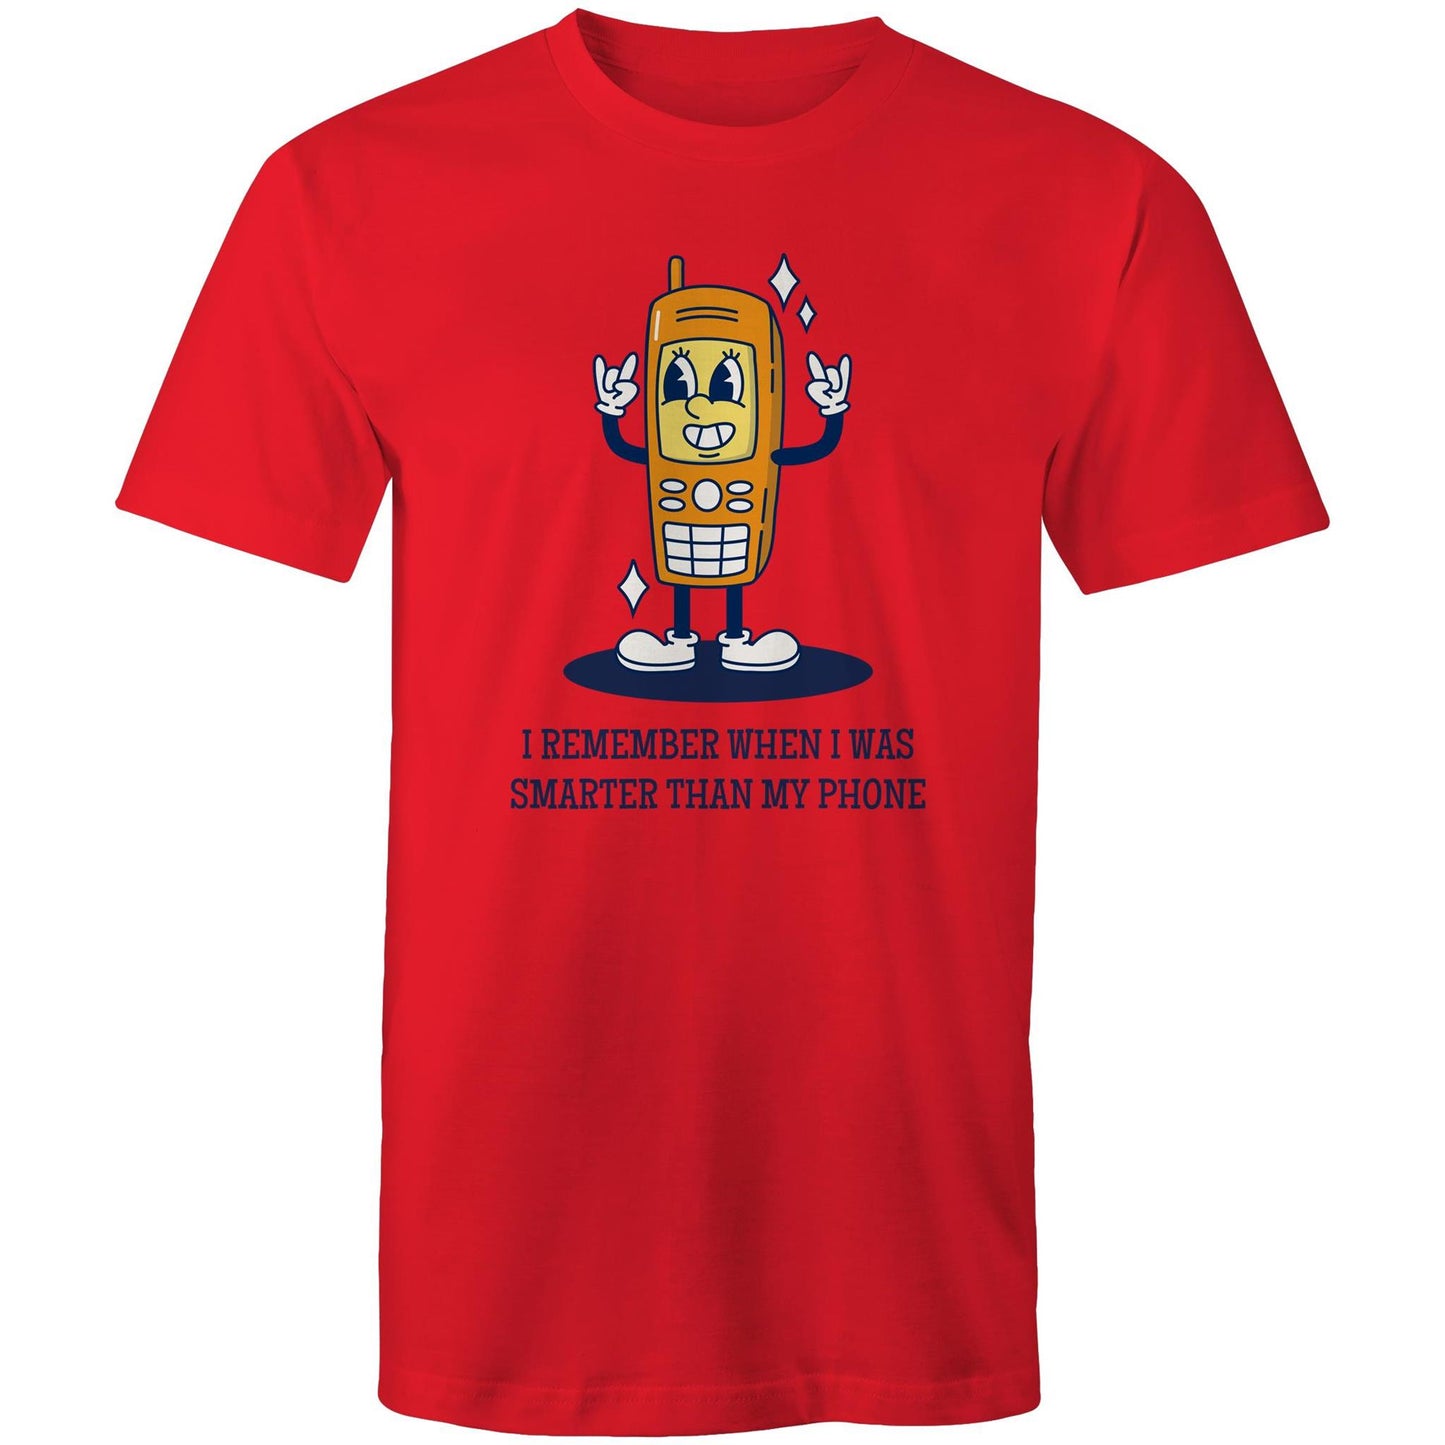 I Remember When I Was Smarter Than My Phone - Mens T-Shirt Red Mens T-shirt Retro Tech